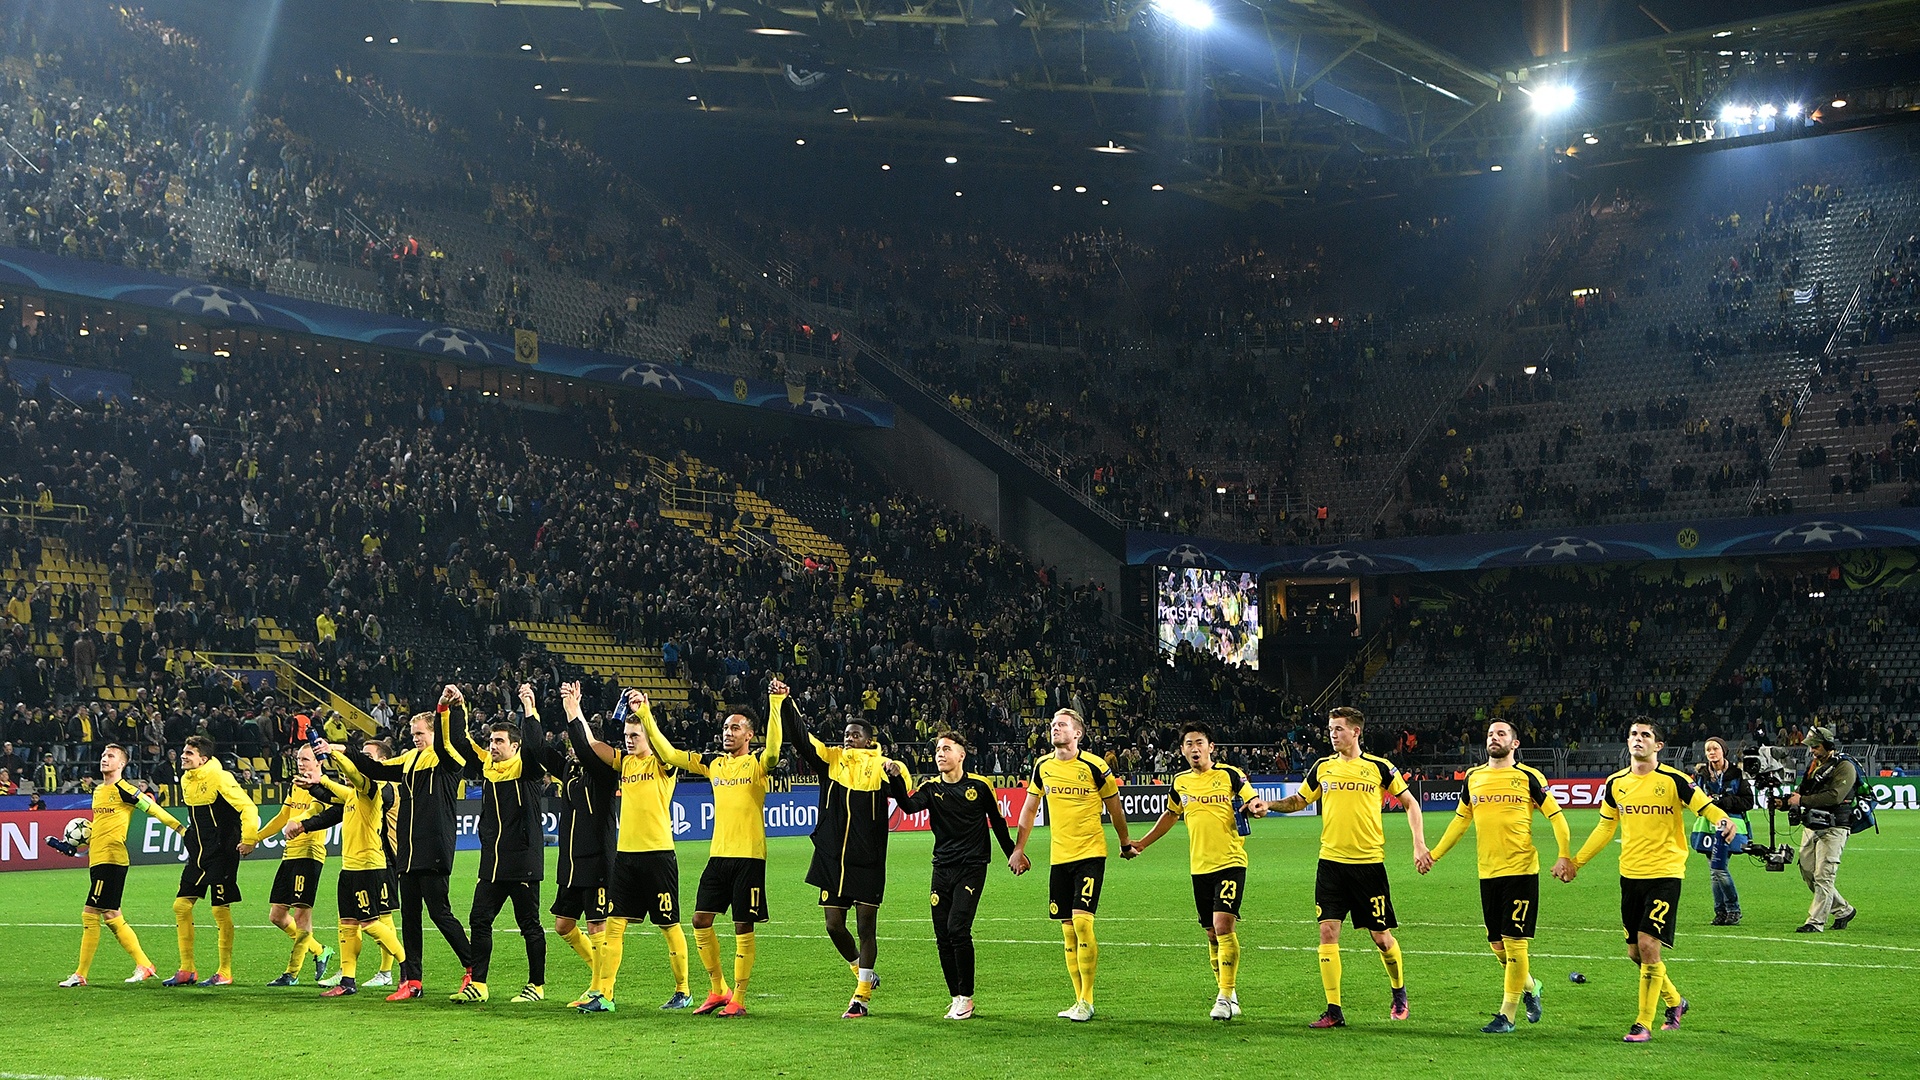 Tonight's match B:Dortmund vs. Benfica will be played in the Signal Iduna Park. Goal